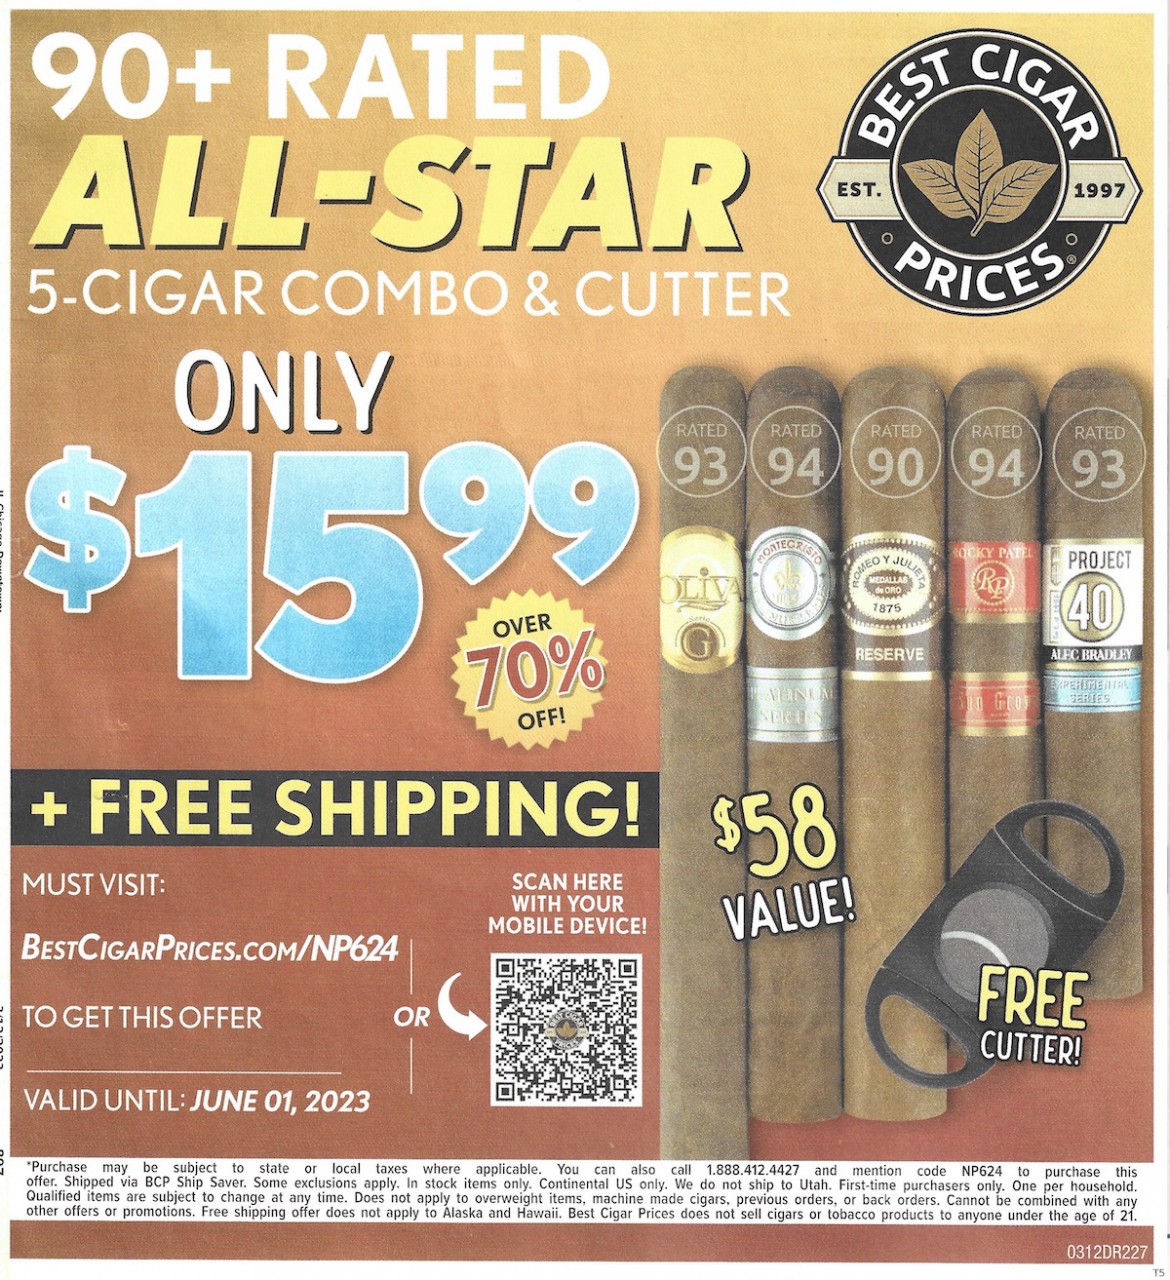 Best Cigar Prices Coupon Code March 2023